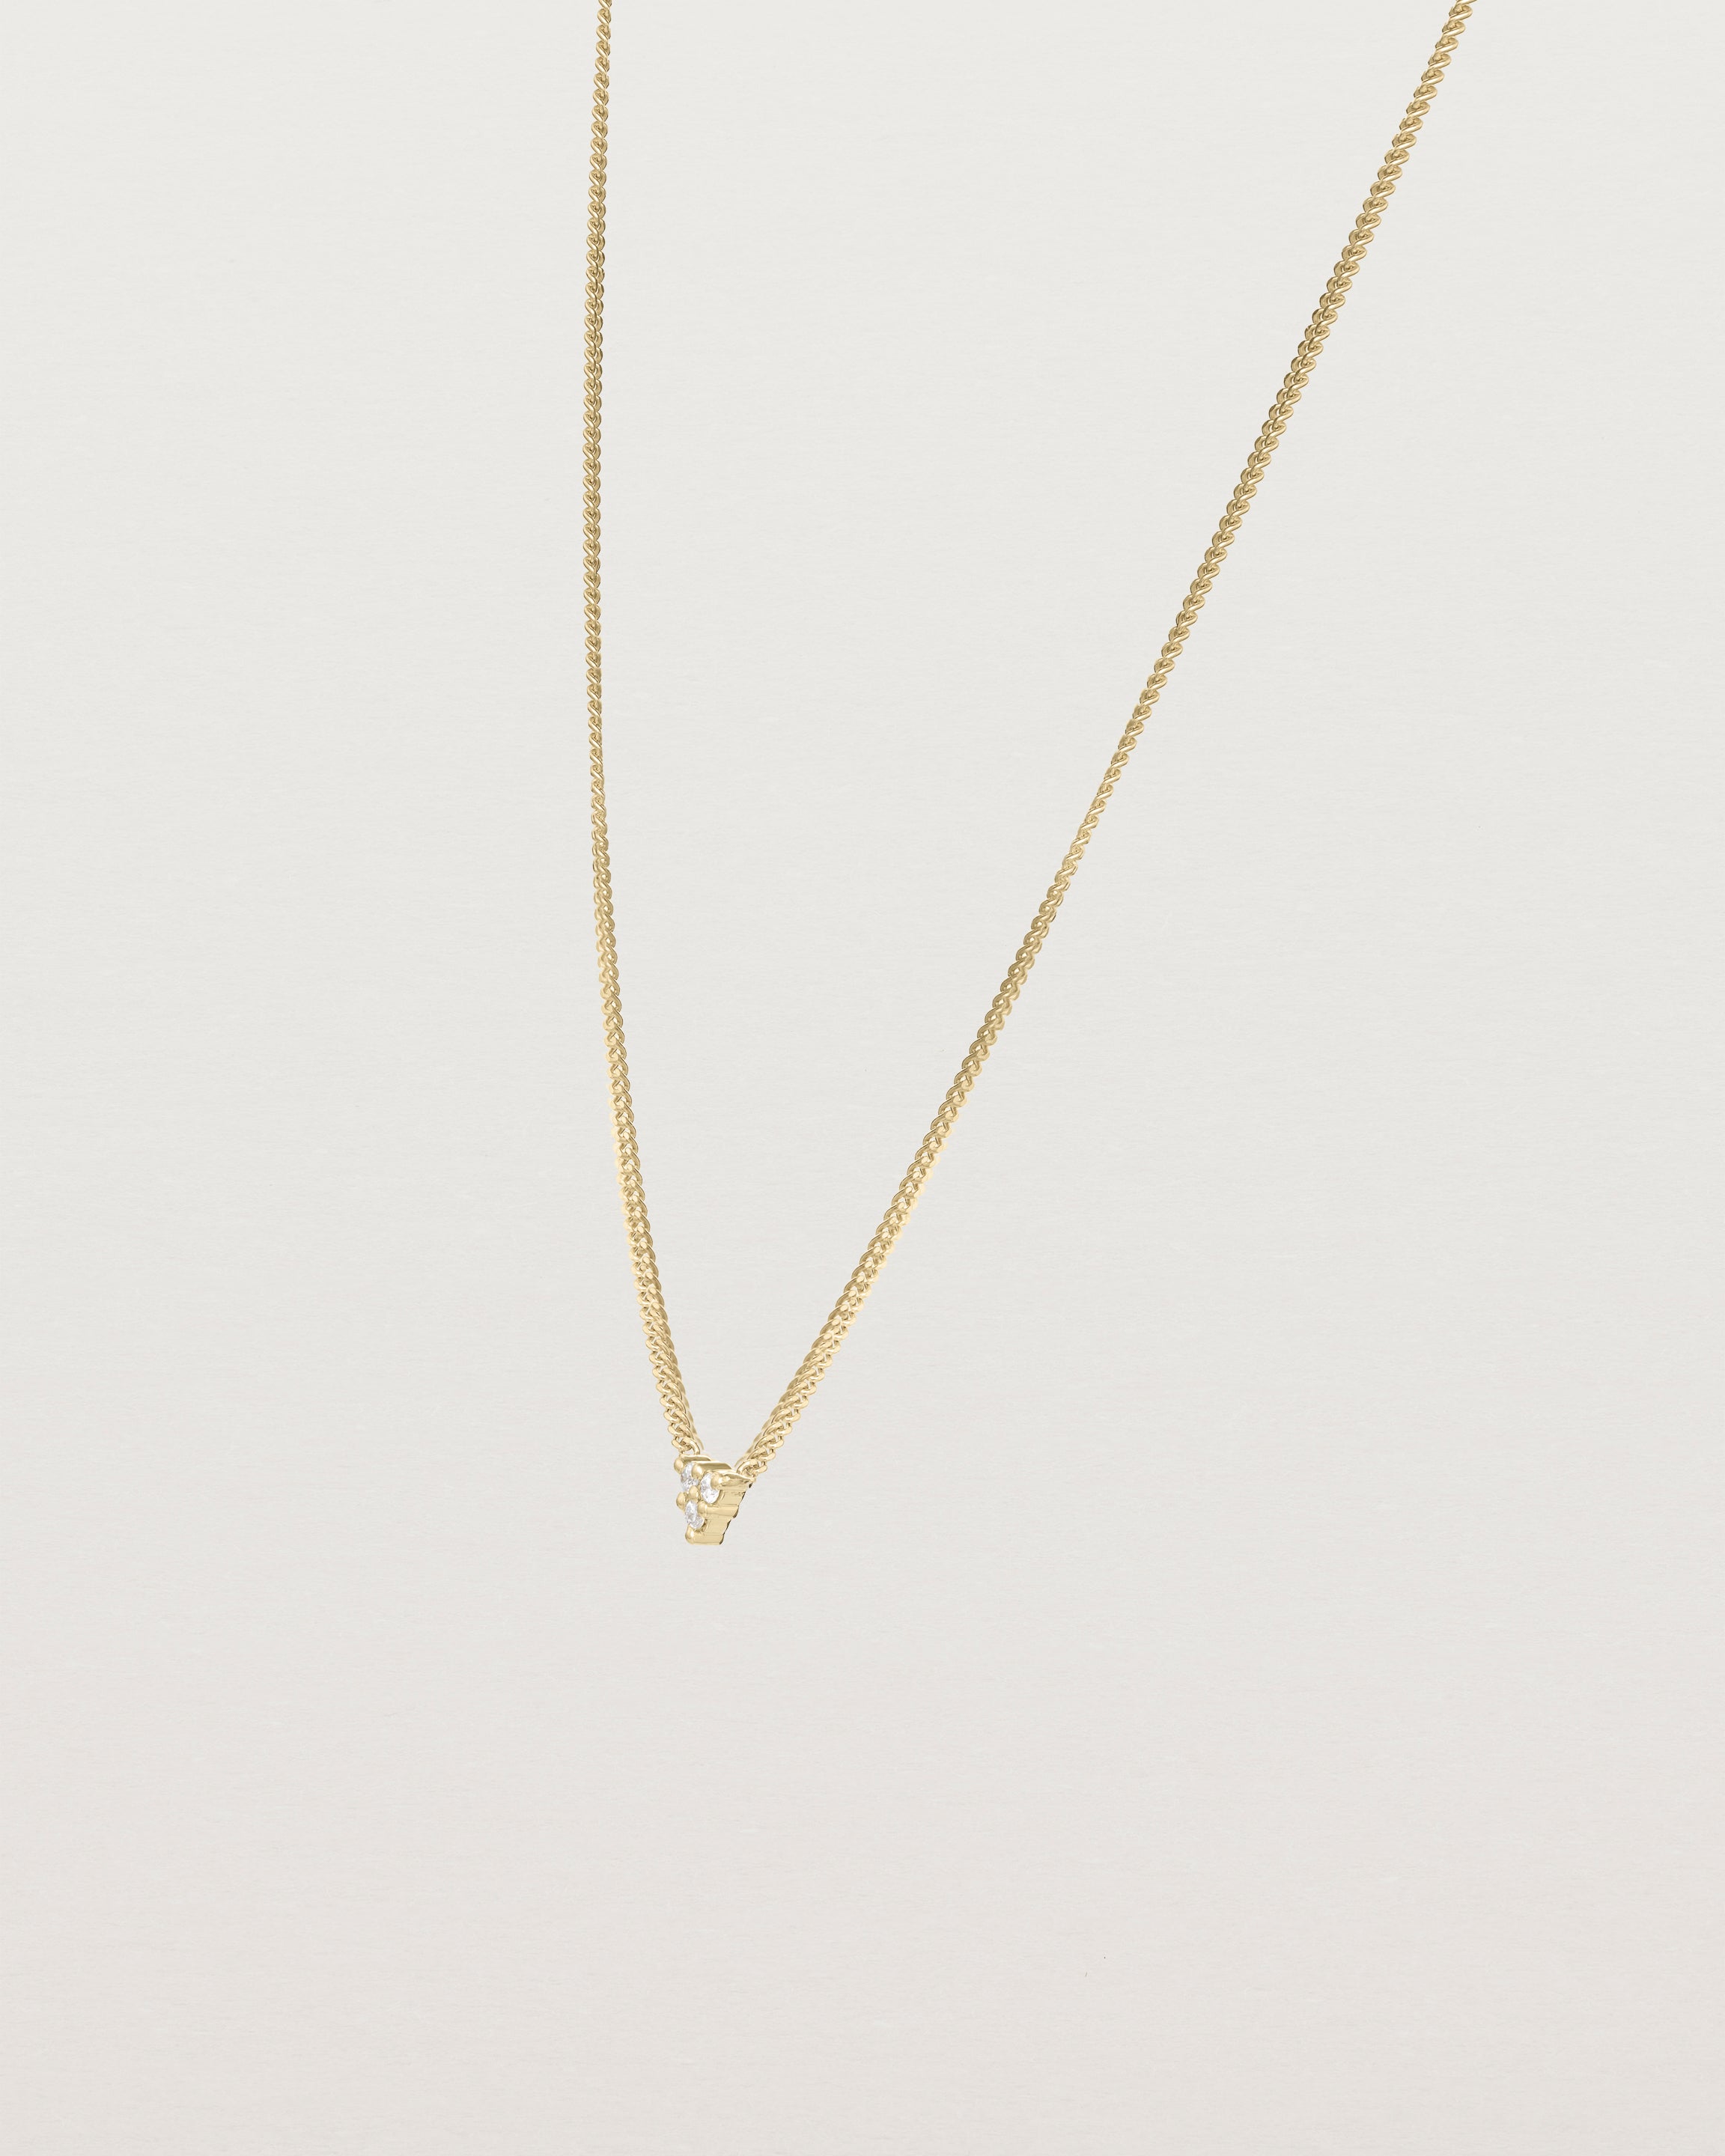 Angled view of the Kalani Necklace | Diamonds in yellow gold.